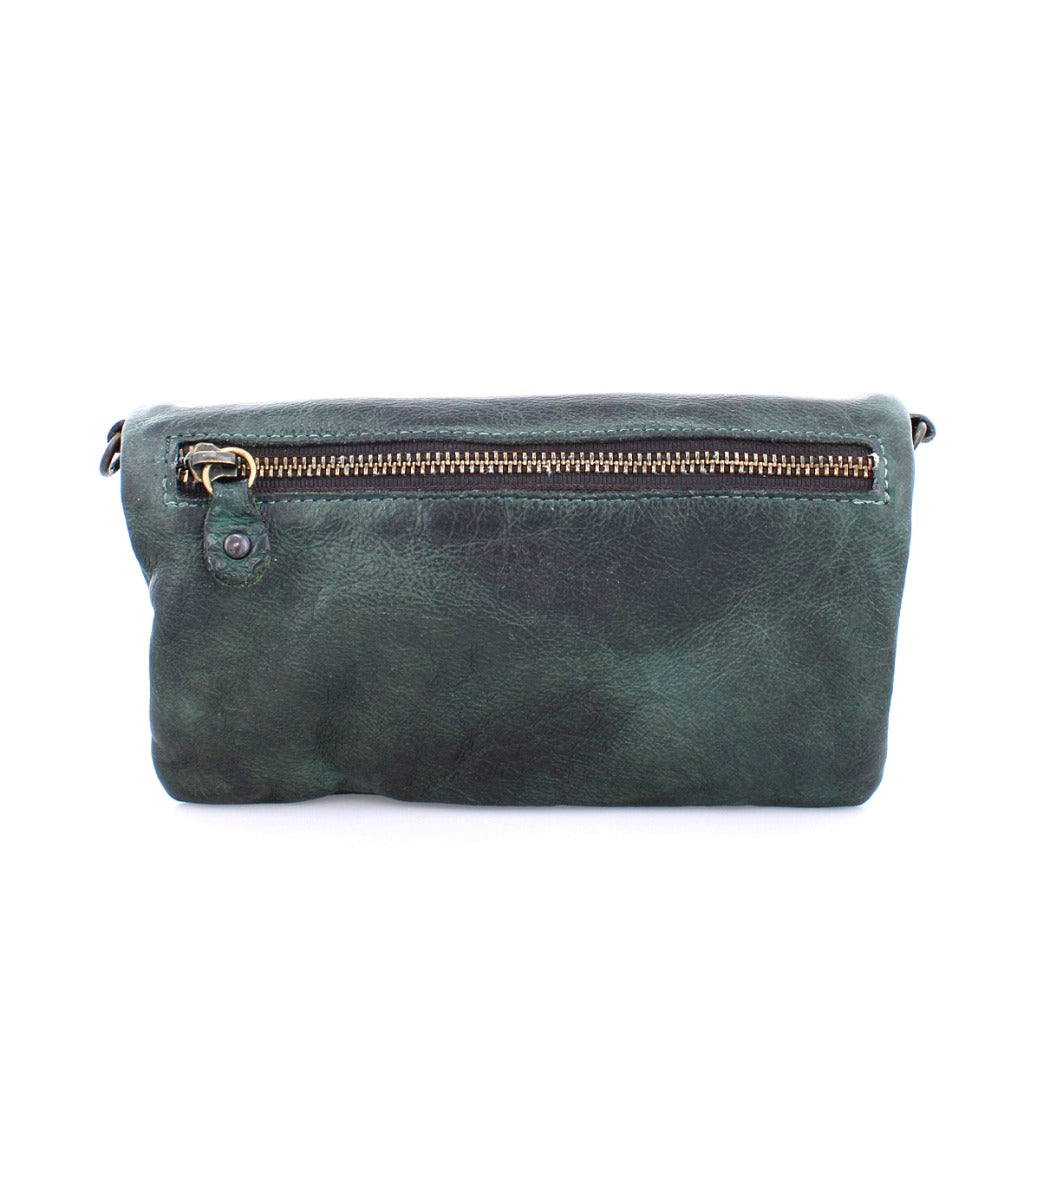 A Cadence by Bed Stu, a teal leather cross body bag with a zipper.